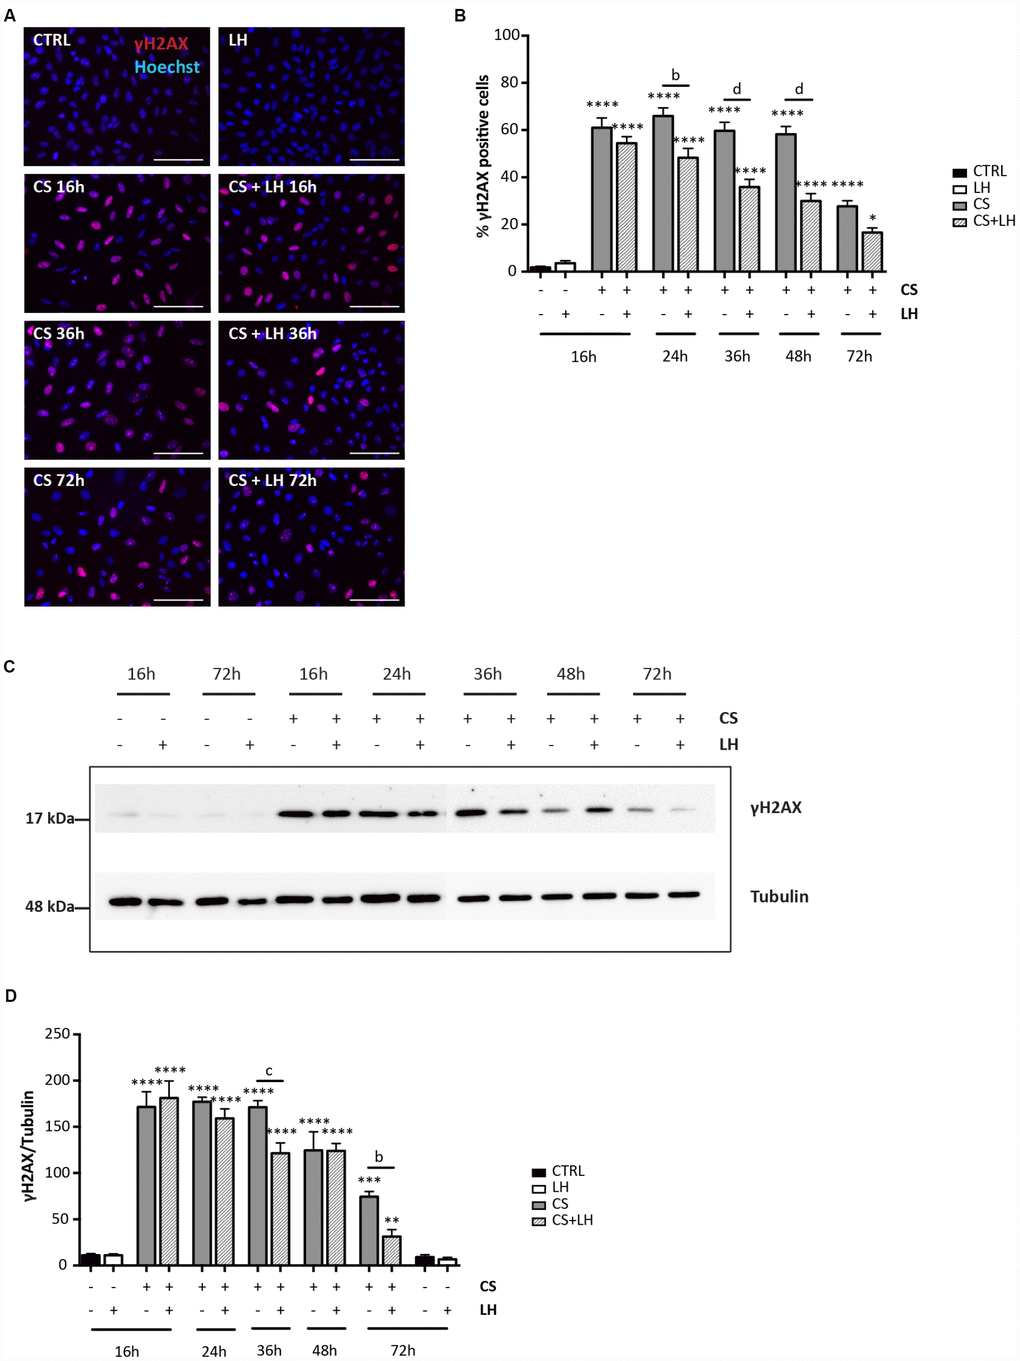 LH modulates the H2AX phosphorylation in somatic ovarian cells. (A) Representative IF for γH2AX in cultured ovarian somatic cells treated with 10 μM CS with/out 200 mIU/mL LH for the indicated times. Scale bar = 100 μm. (B) The graph reports the quantification of the percentage of cells positive for γH2AX. Data are shown as mean ± SEM of five experiments. Statistical differences vs control *pvs CS group b = pd = pC, D) Representative WB of γH2AX in cells treated with CS with/out LH for the indicated times. Note a clear reduction of γH2AX level at 72 hrs. Data are expressed as mean ± SEM of three experiments. Statistical differences vs control **pvs CS+LH group b = pc = p